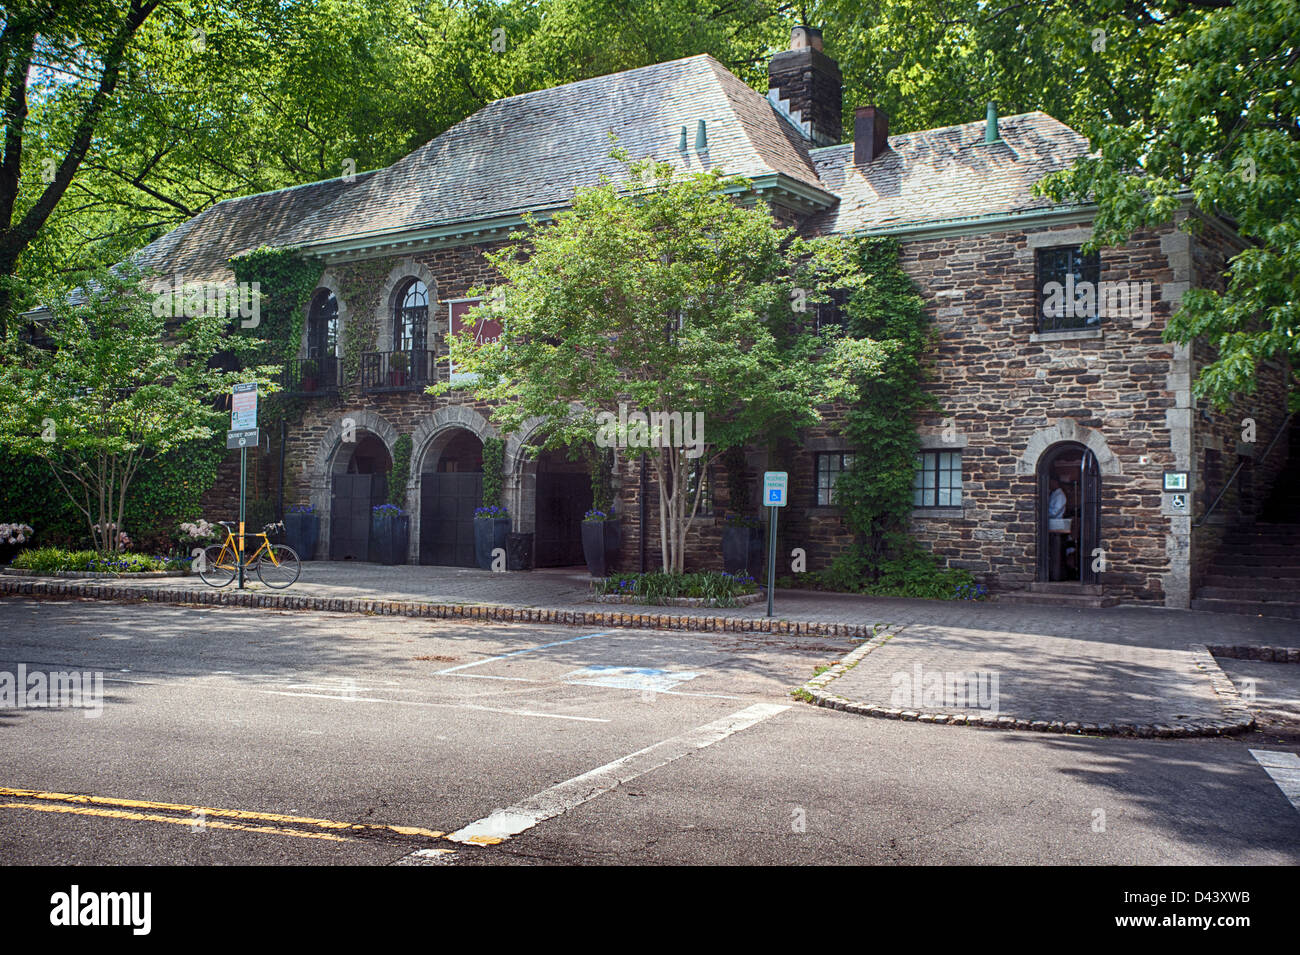 Restaurant near The Cloisters in Fort Tryon Park, New York City. Stock Photo